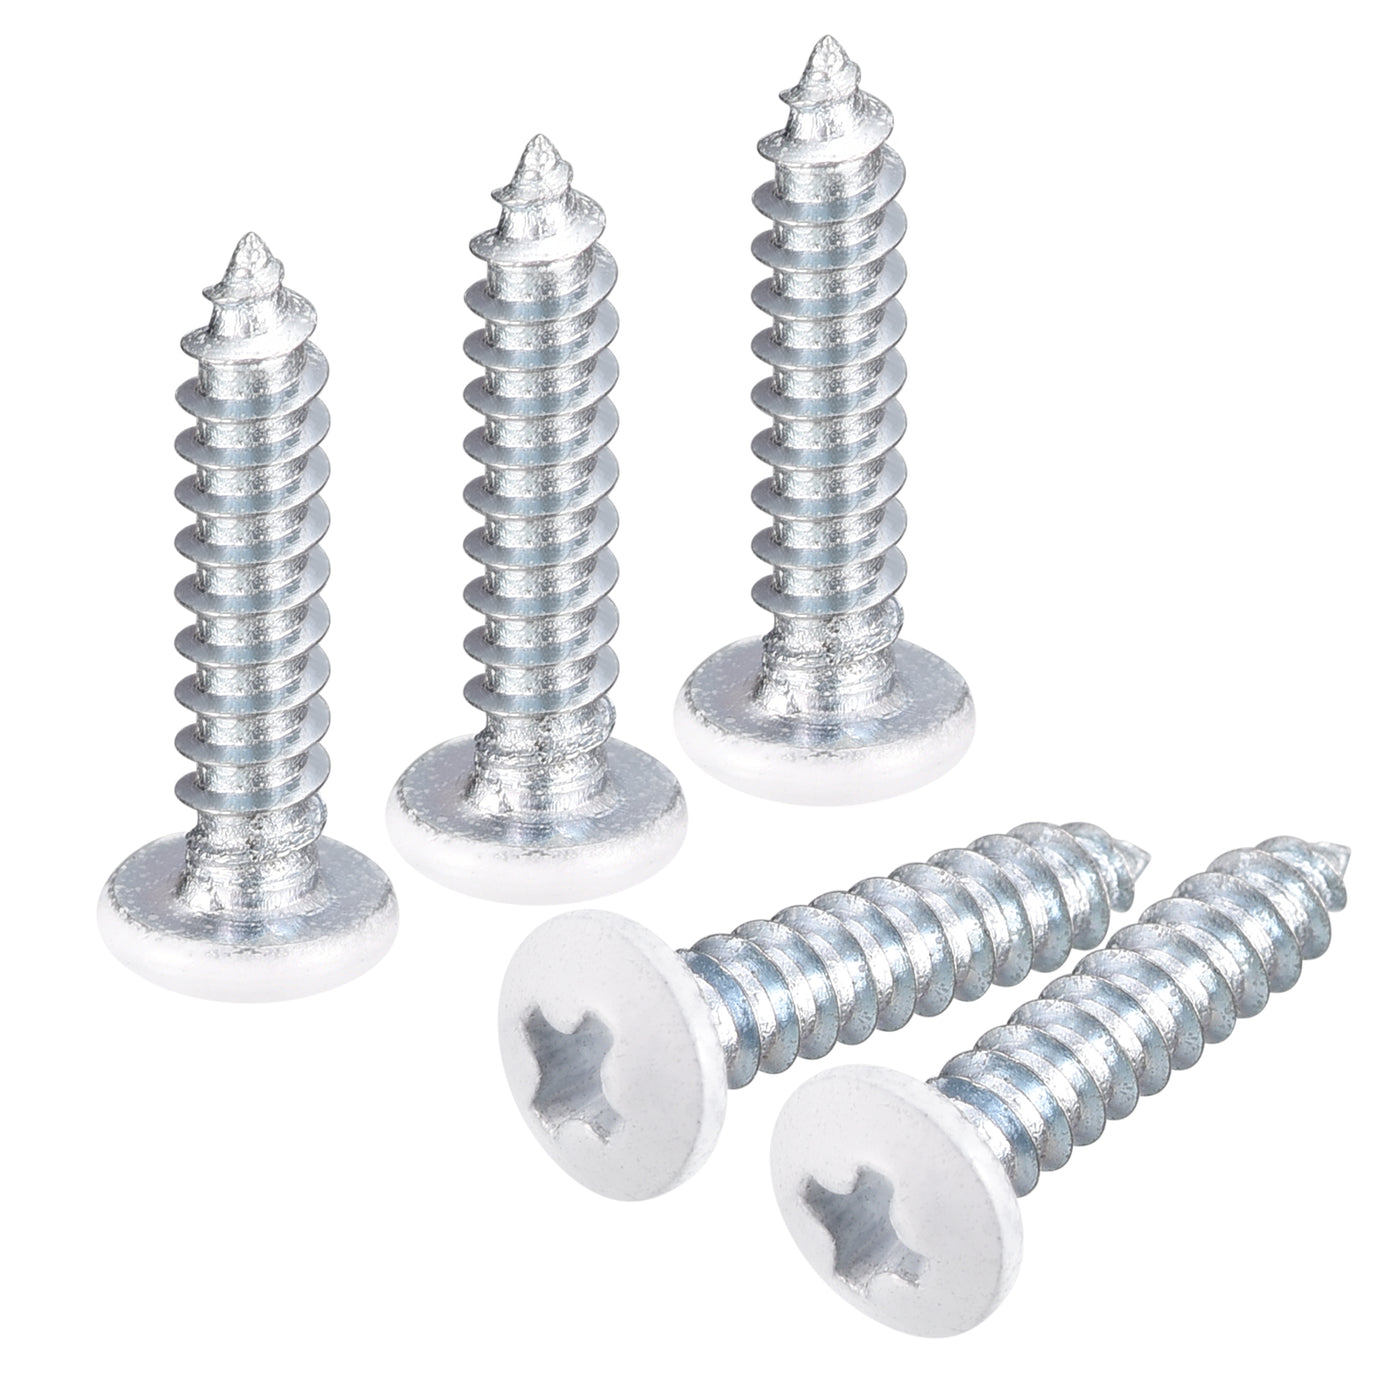 uxcell Uxcell ST2.5x12mm White Screws Self Tapping Screws, 100pcs Pan Head Phillips Screws